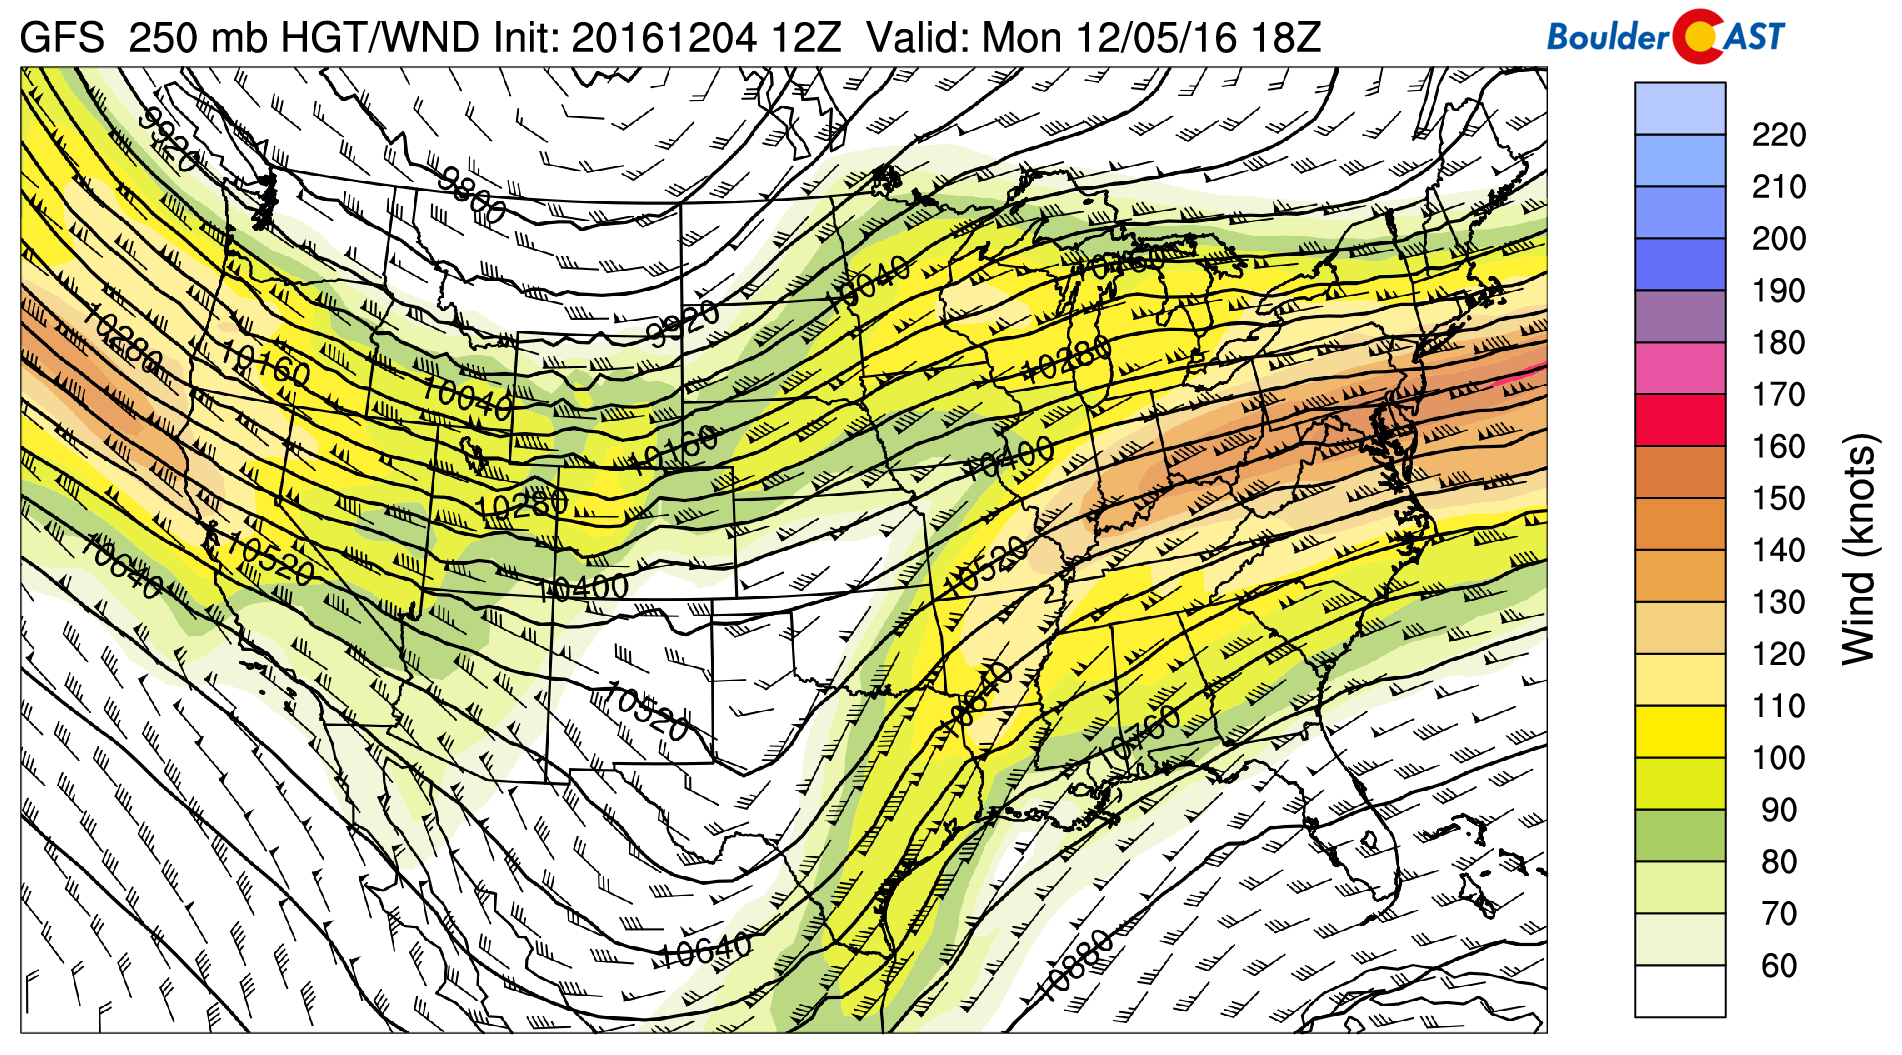 GFS 250 mb upper-level wind speed and jet stream today